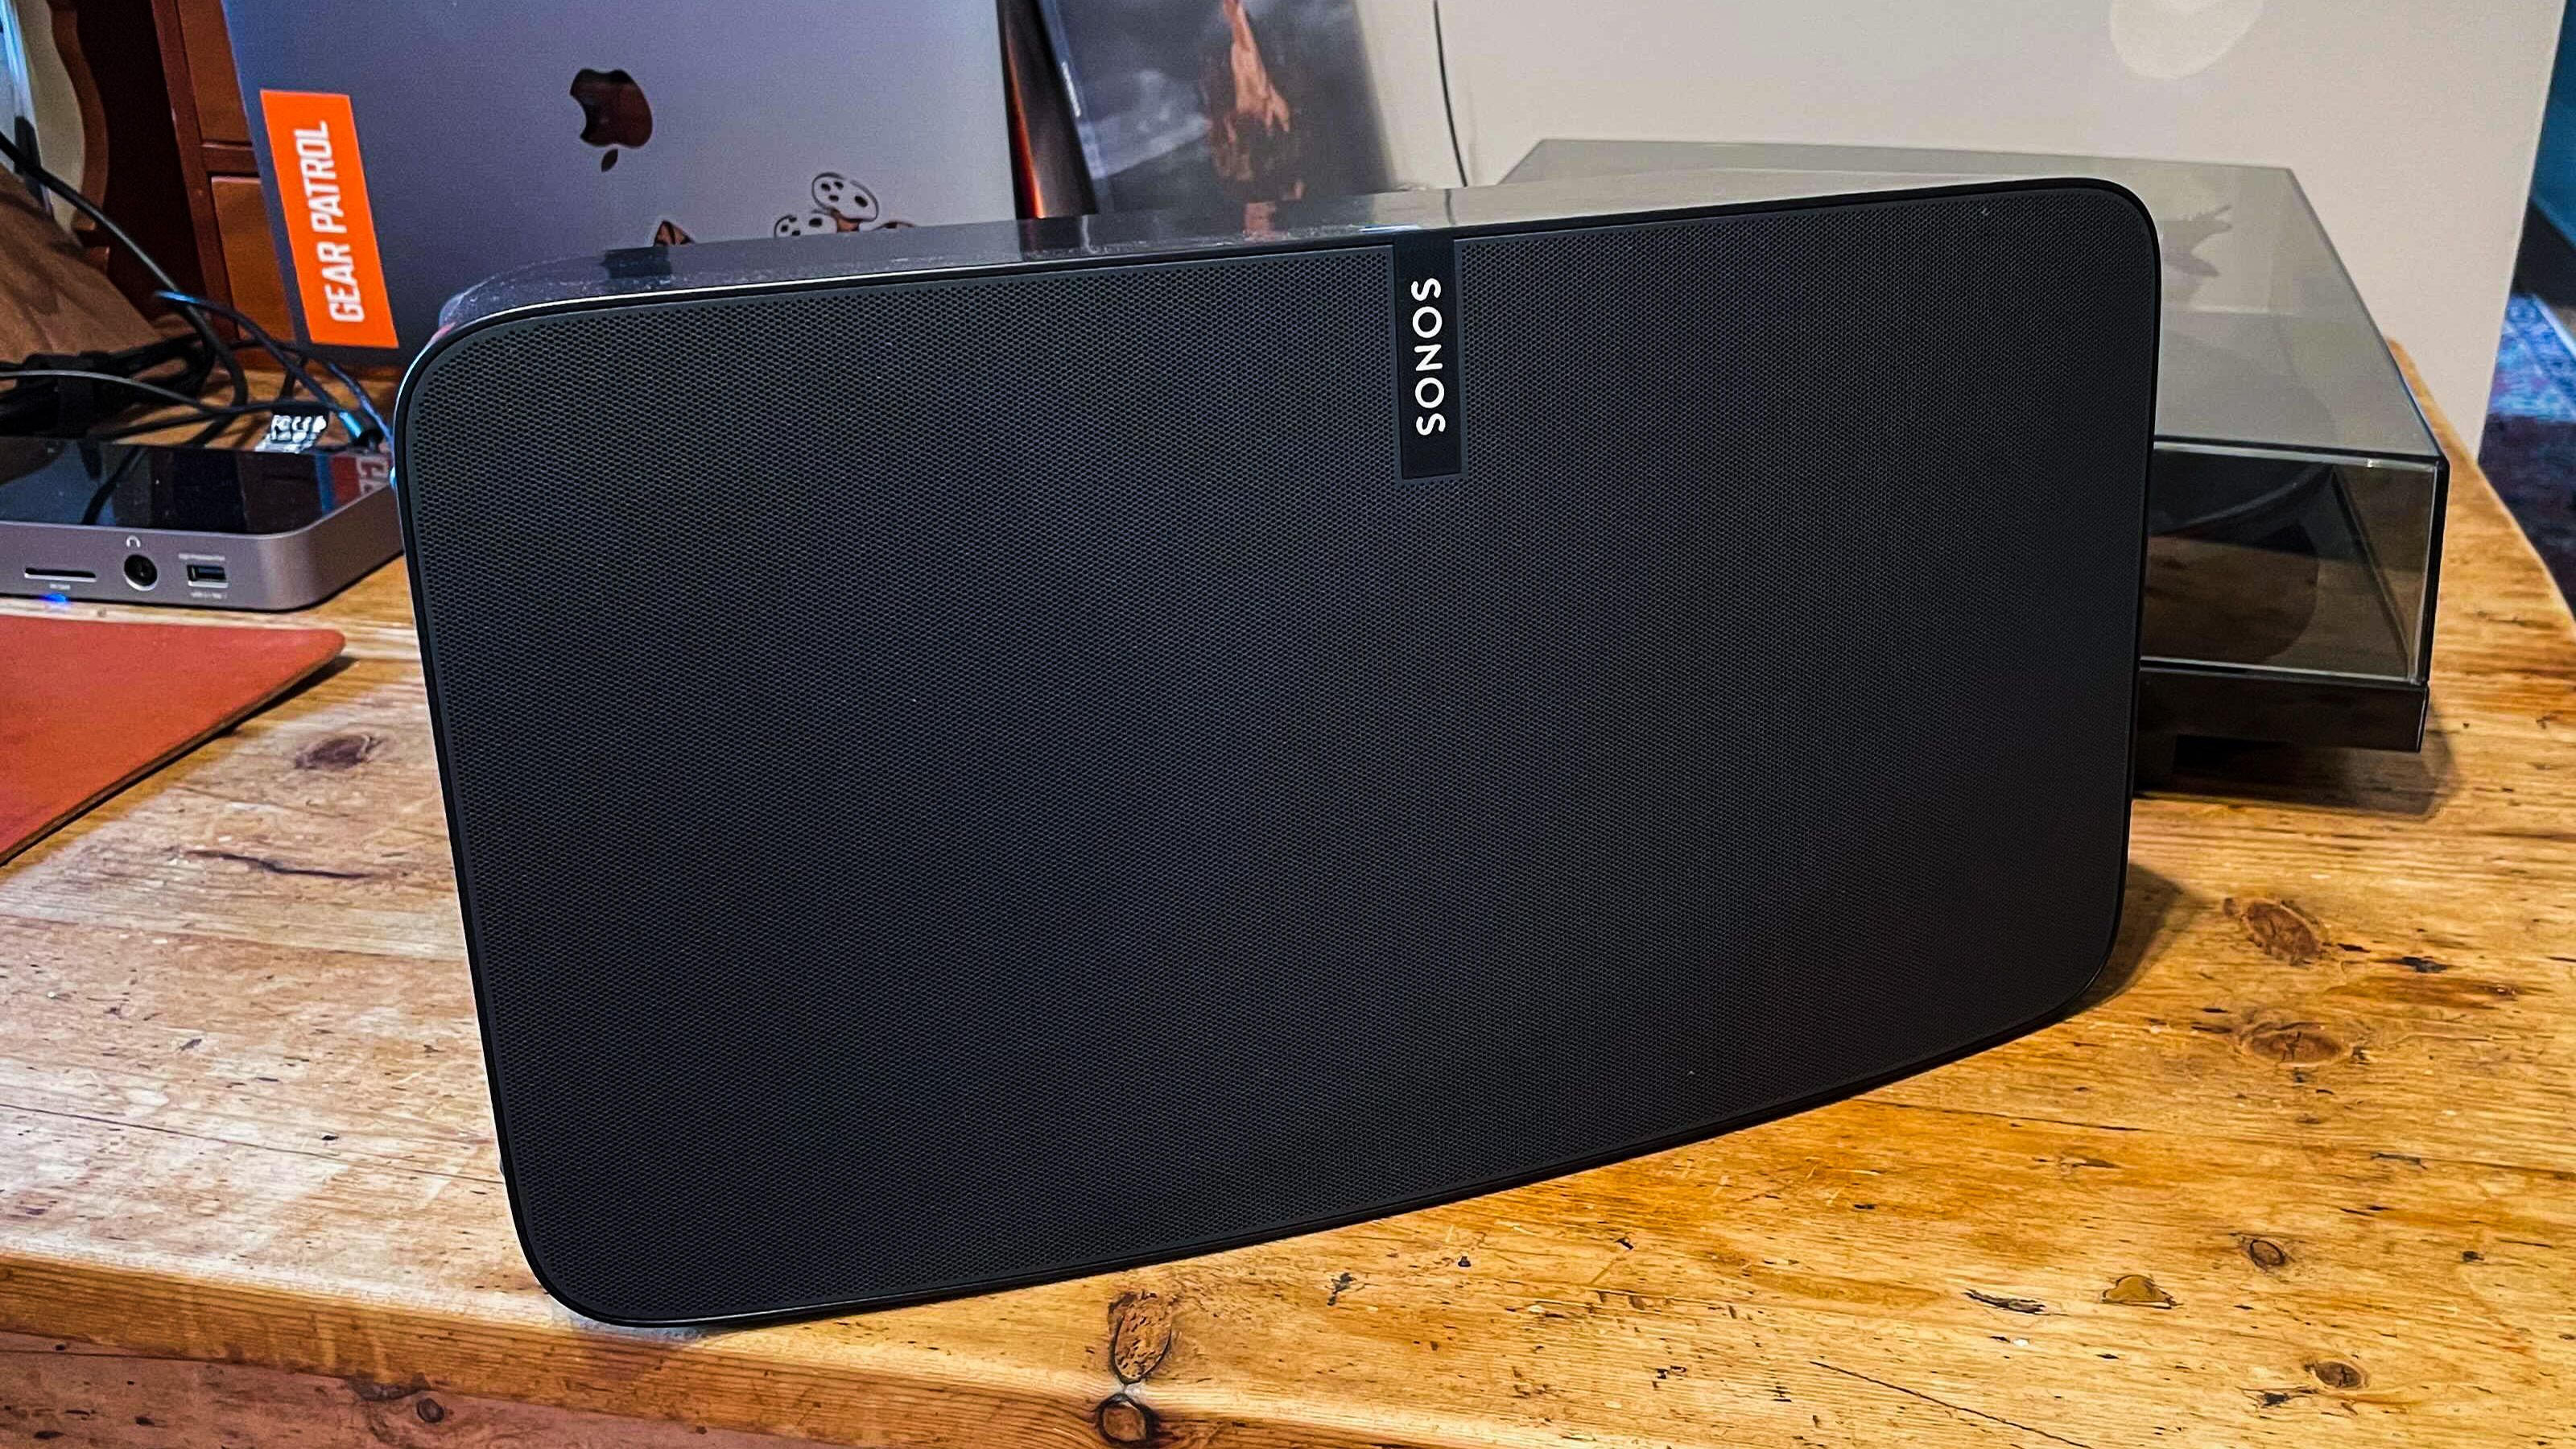 får Revision Forretningsmand How to Stereo Pair a Sonos Play:5 (Gen 2) Speaker